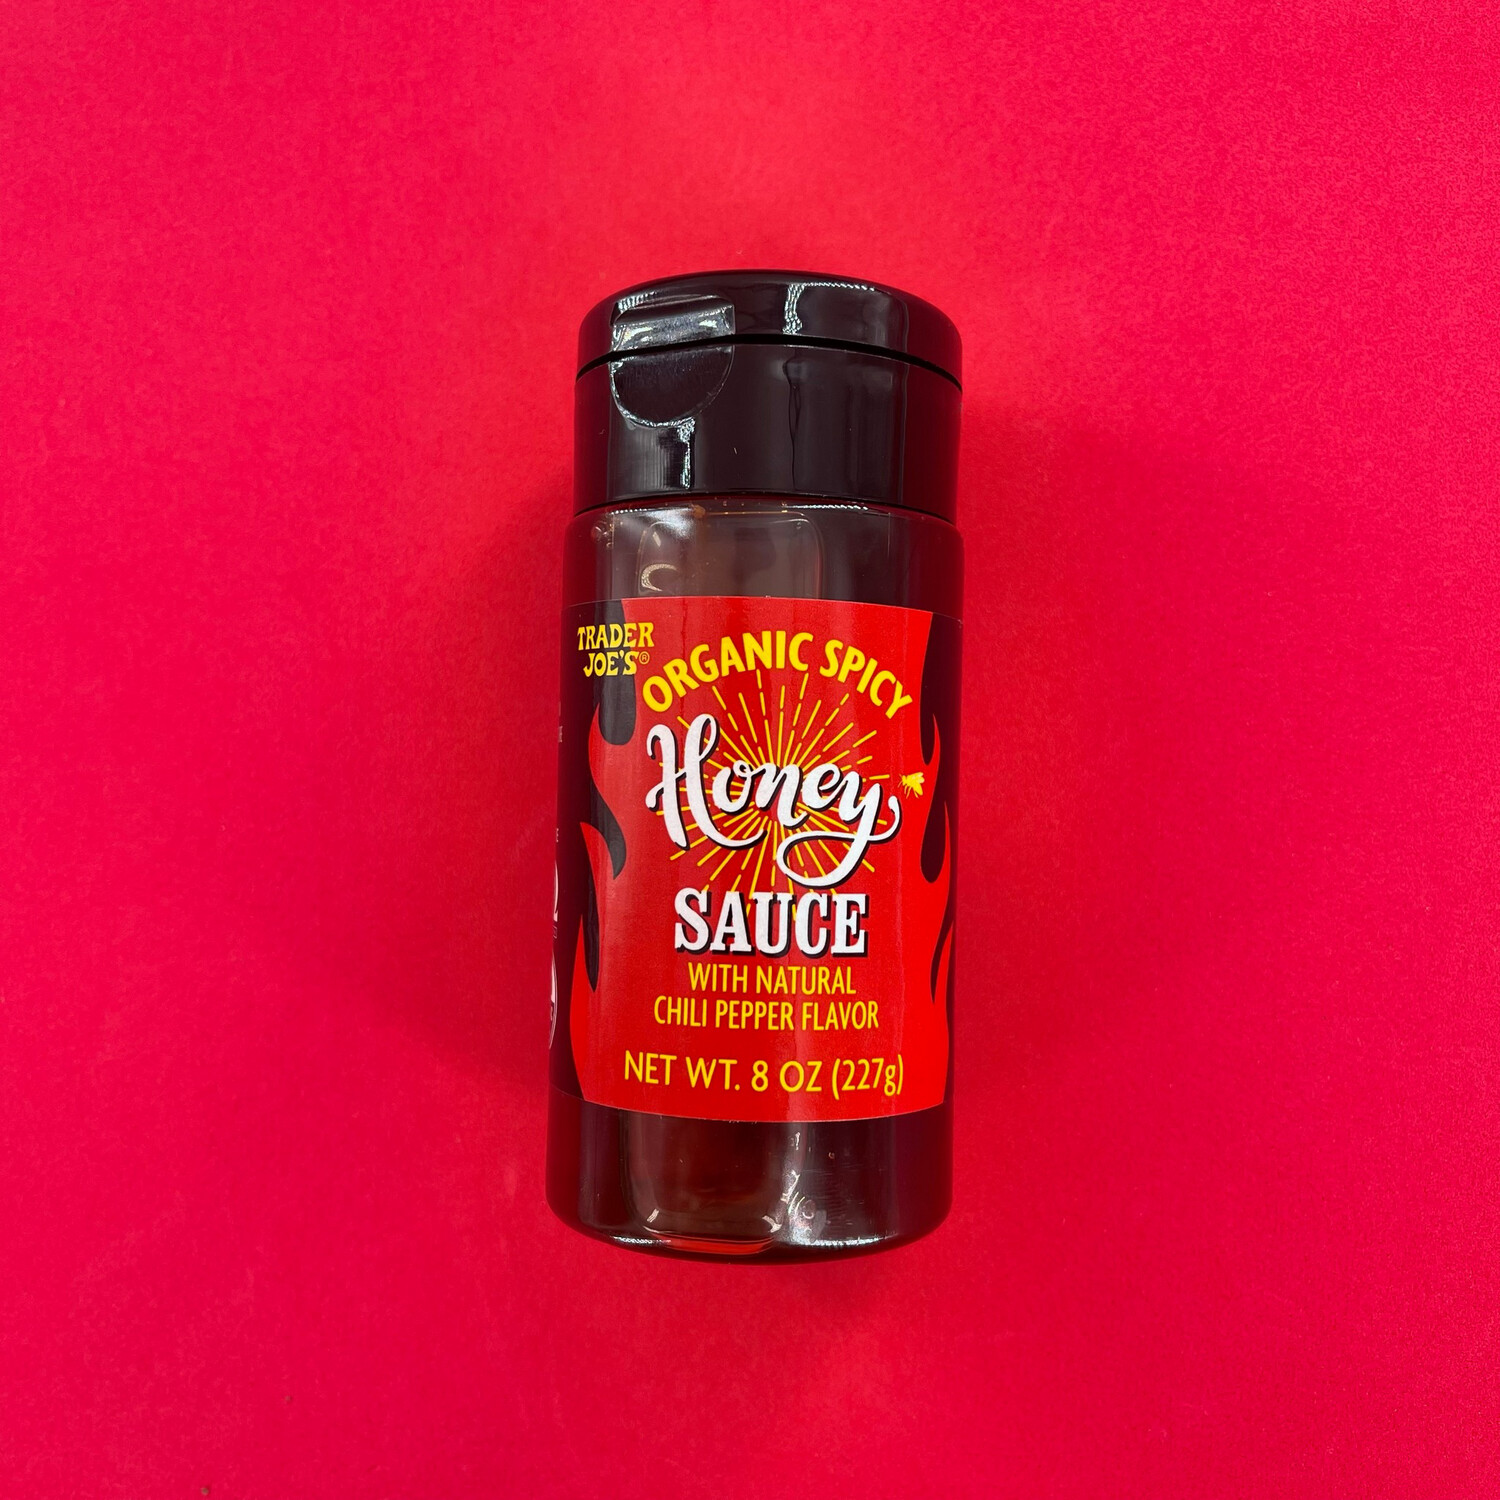 Trader Joe's Organic Spicy Honey Sauce with Natural Chili Pepper